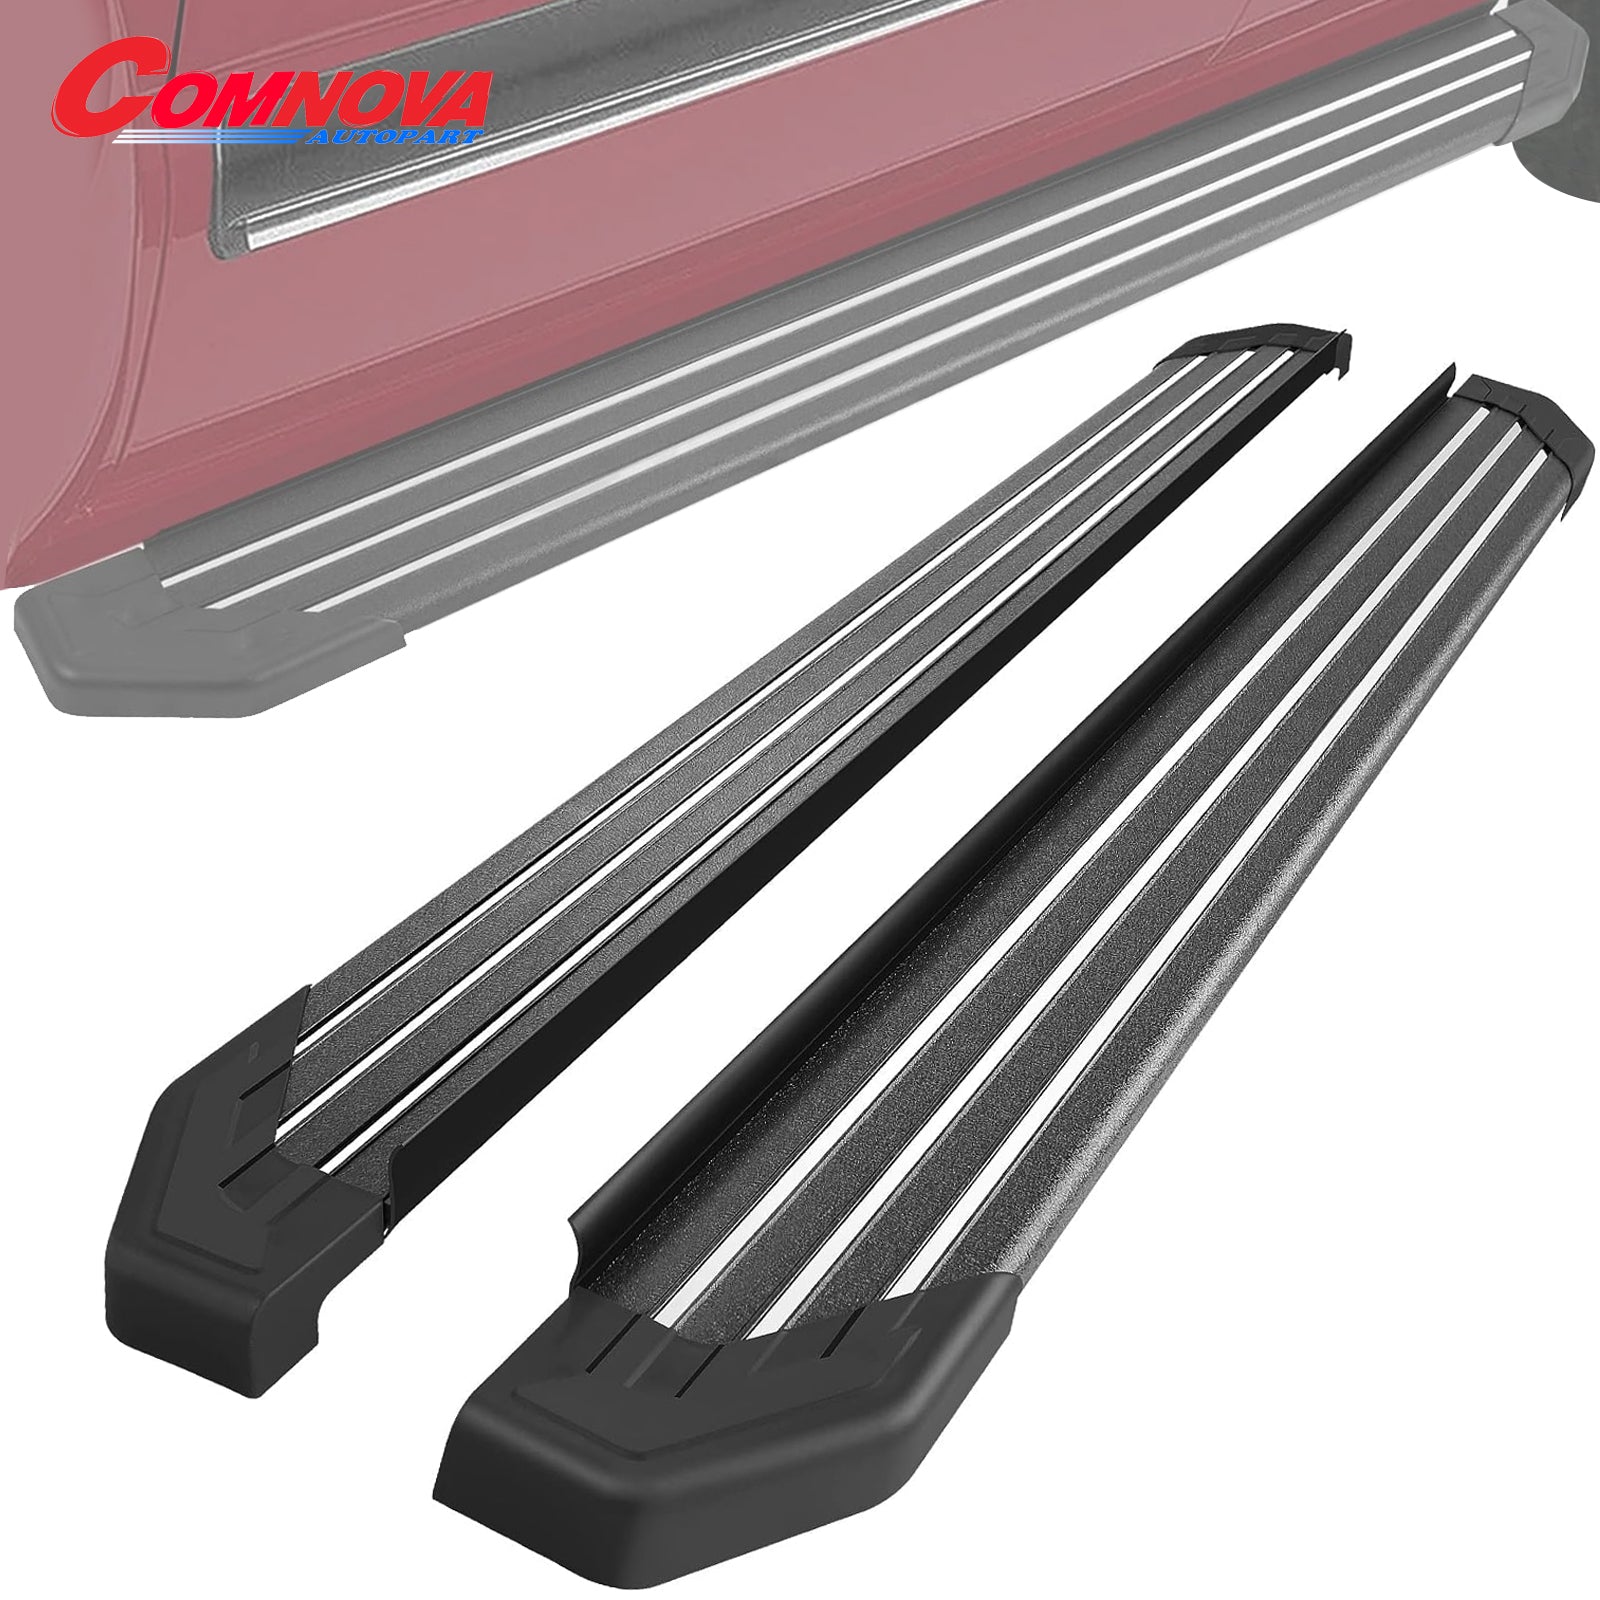 5.5Inch Aluminum Running Boards Compatible with 09-17 Chevy Traverse & 07-16 GMC Acadia & 07-09 Buick Enclave & 07-10 Saturn Outlook C73 Style. - COMNOVA AUTOPART